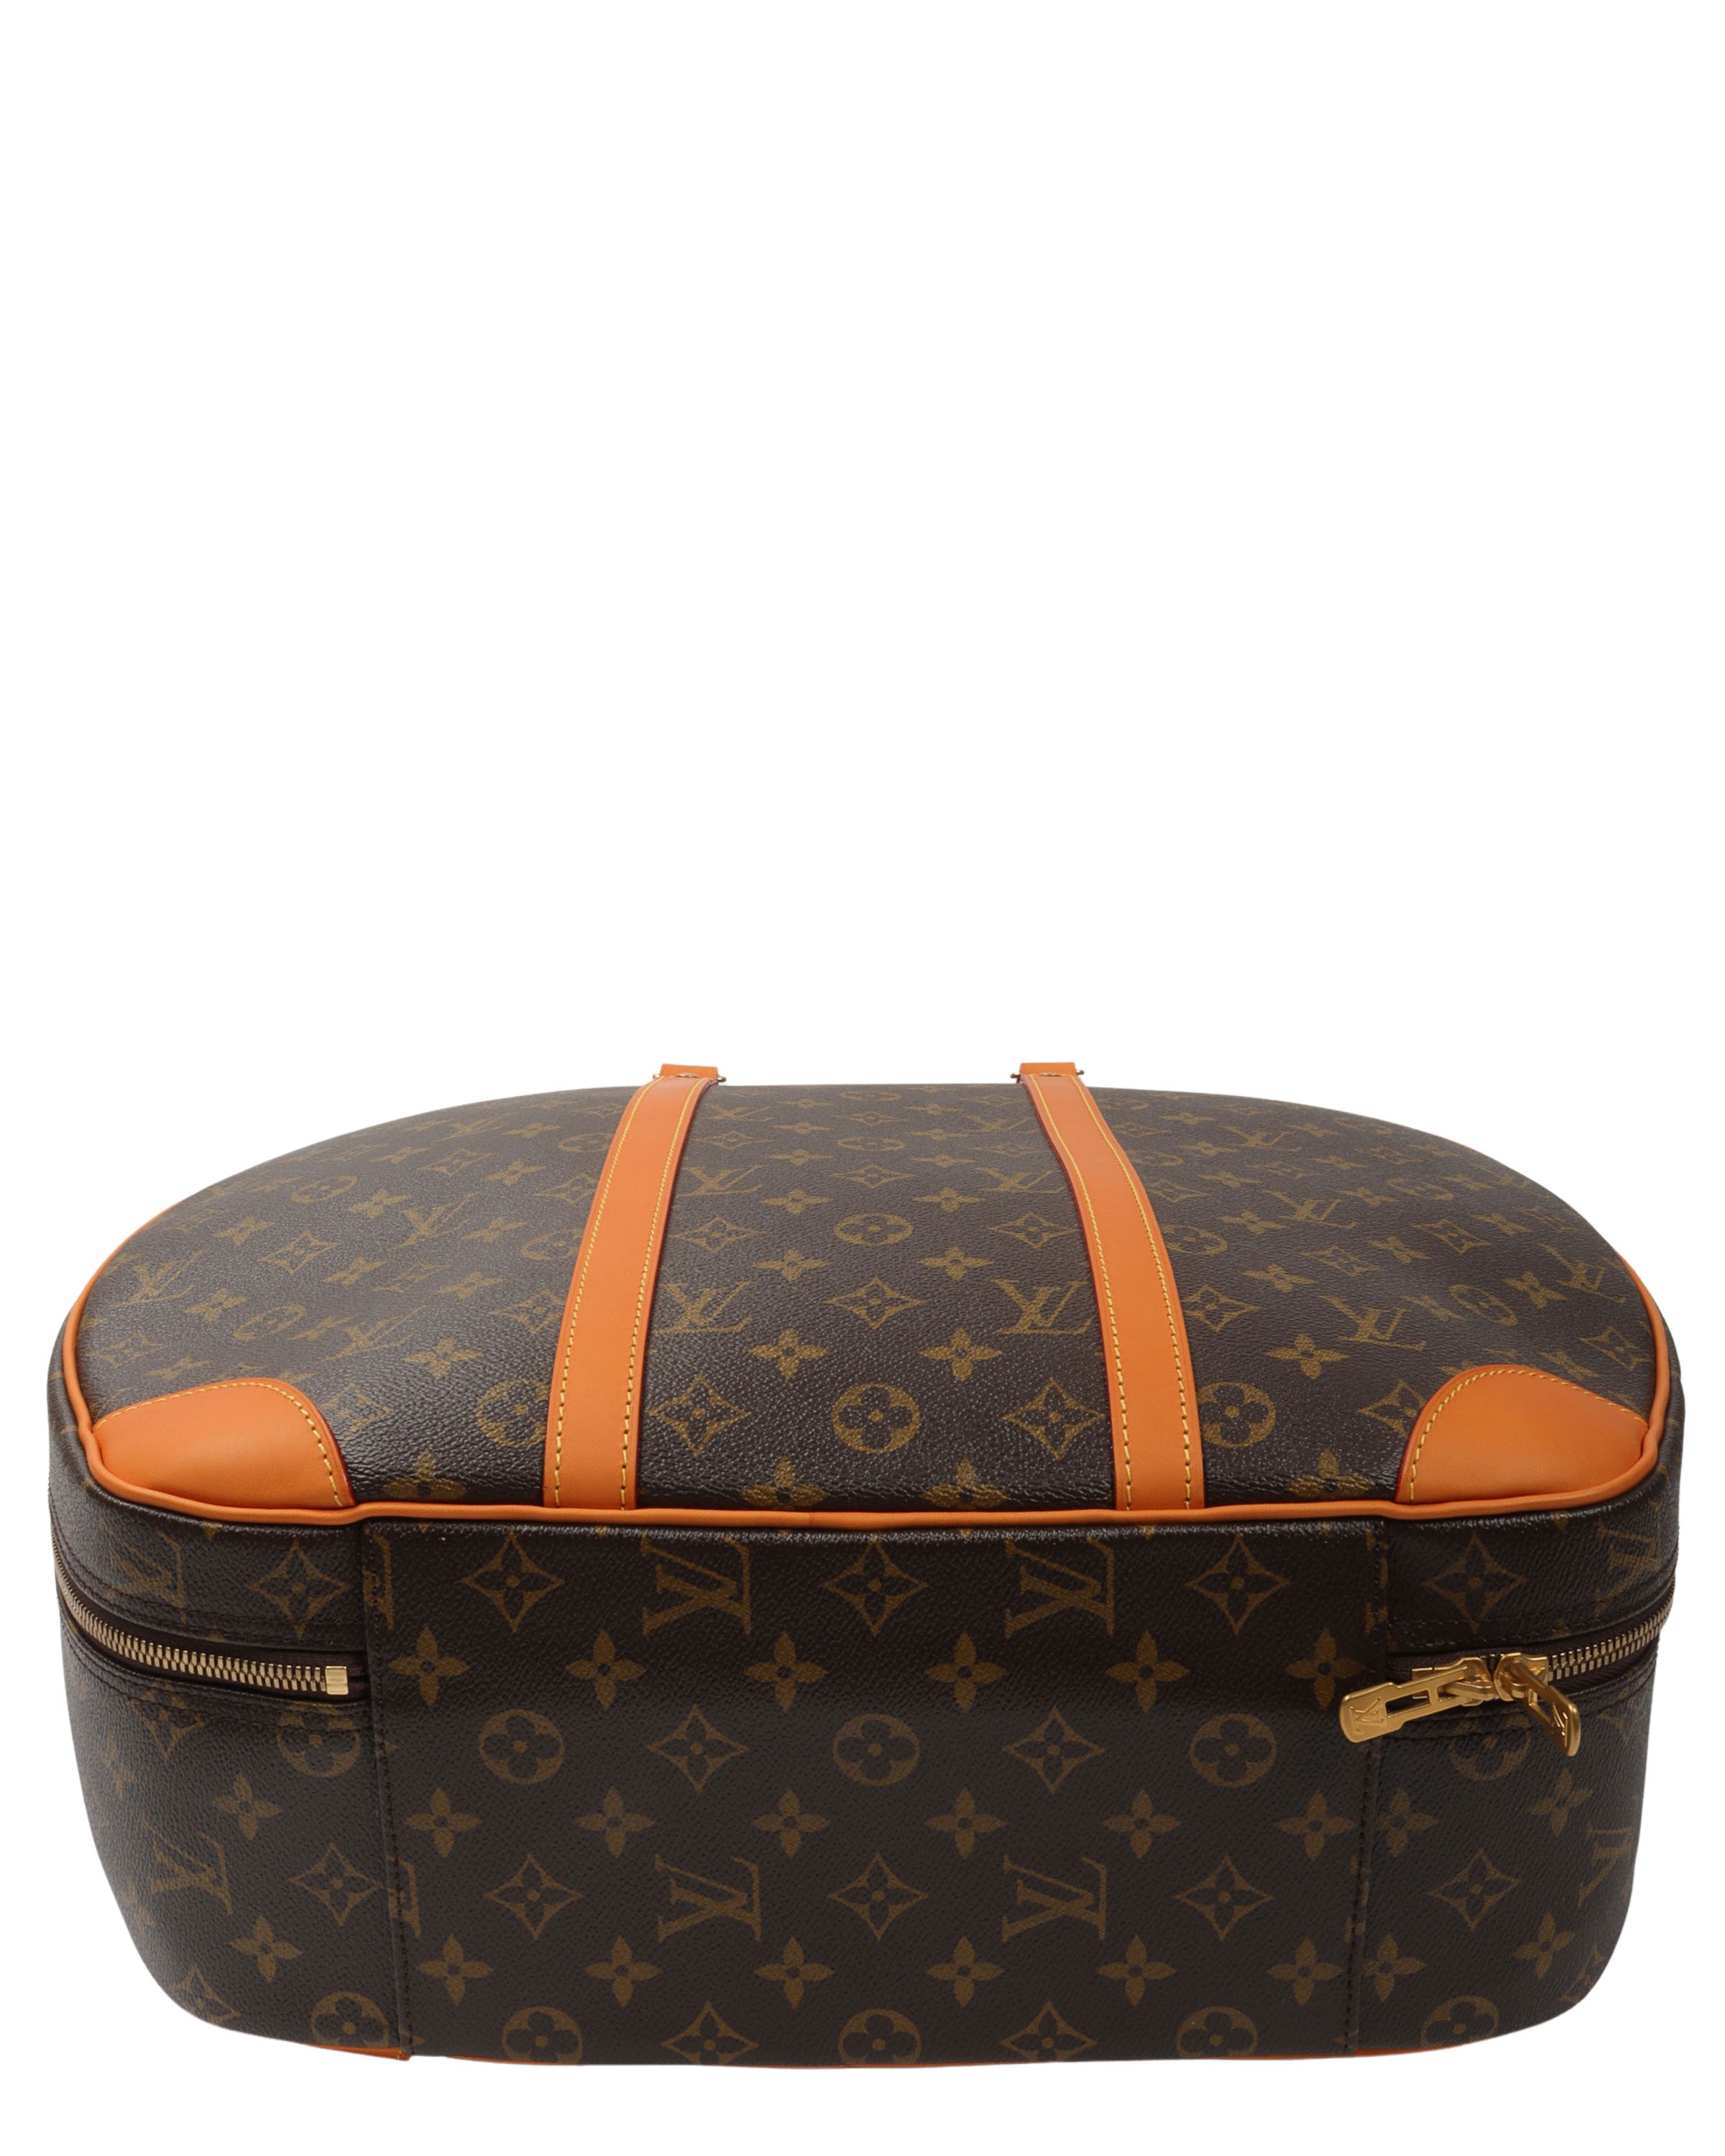 Louis Vuitton Iconoclast Karl Lagerfeld Monogram Boxing Gloves, Case and Mat